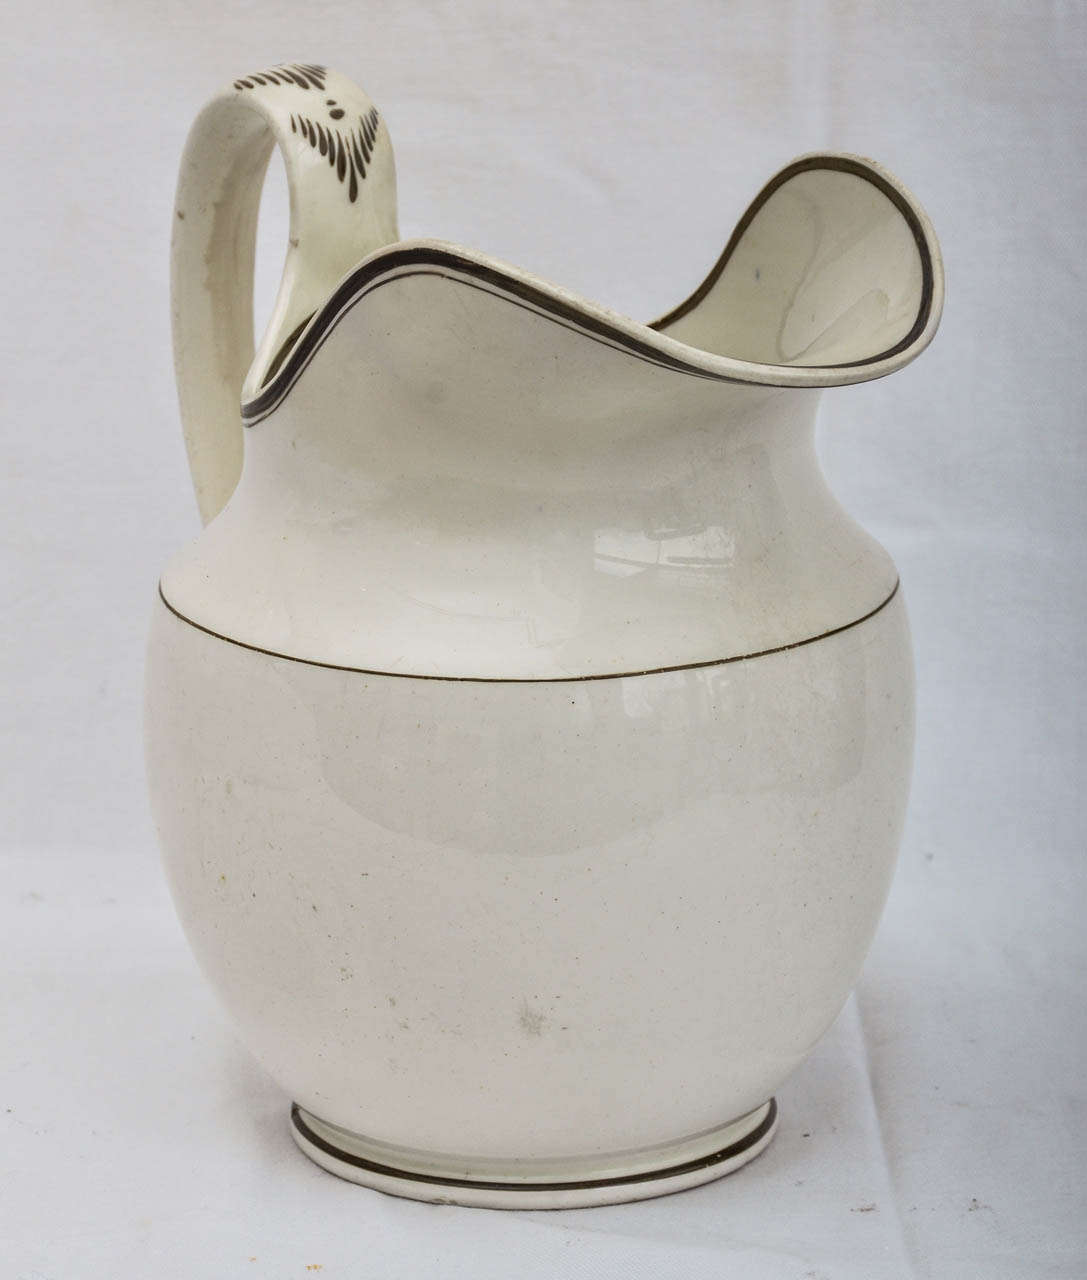 Large 19Th Cent. English Creamware Jug With Dark Brown-Green Pin Stripping To Lip - Base and Three Quarters Up The Body OF The Jug. The Handle Has A Painted Chevron Pattern Decorating. Most Likely Was Used For Cider, Ale Or Milk. The Jug Is In